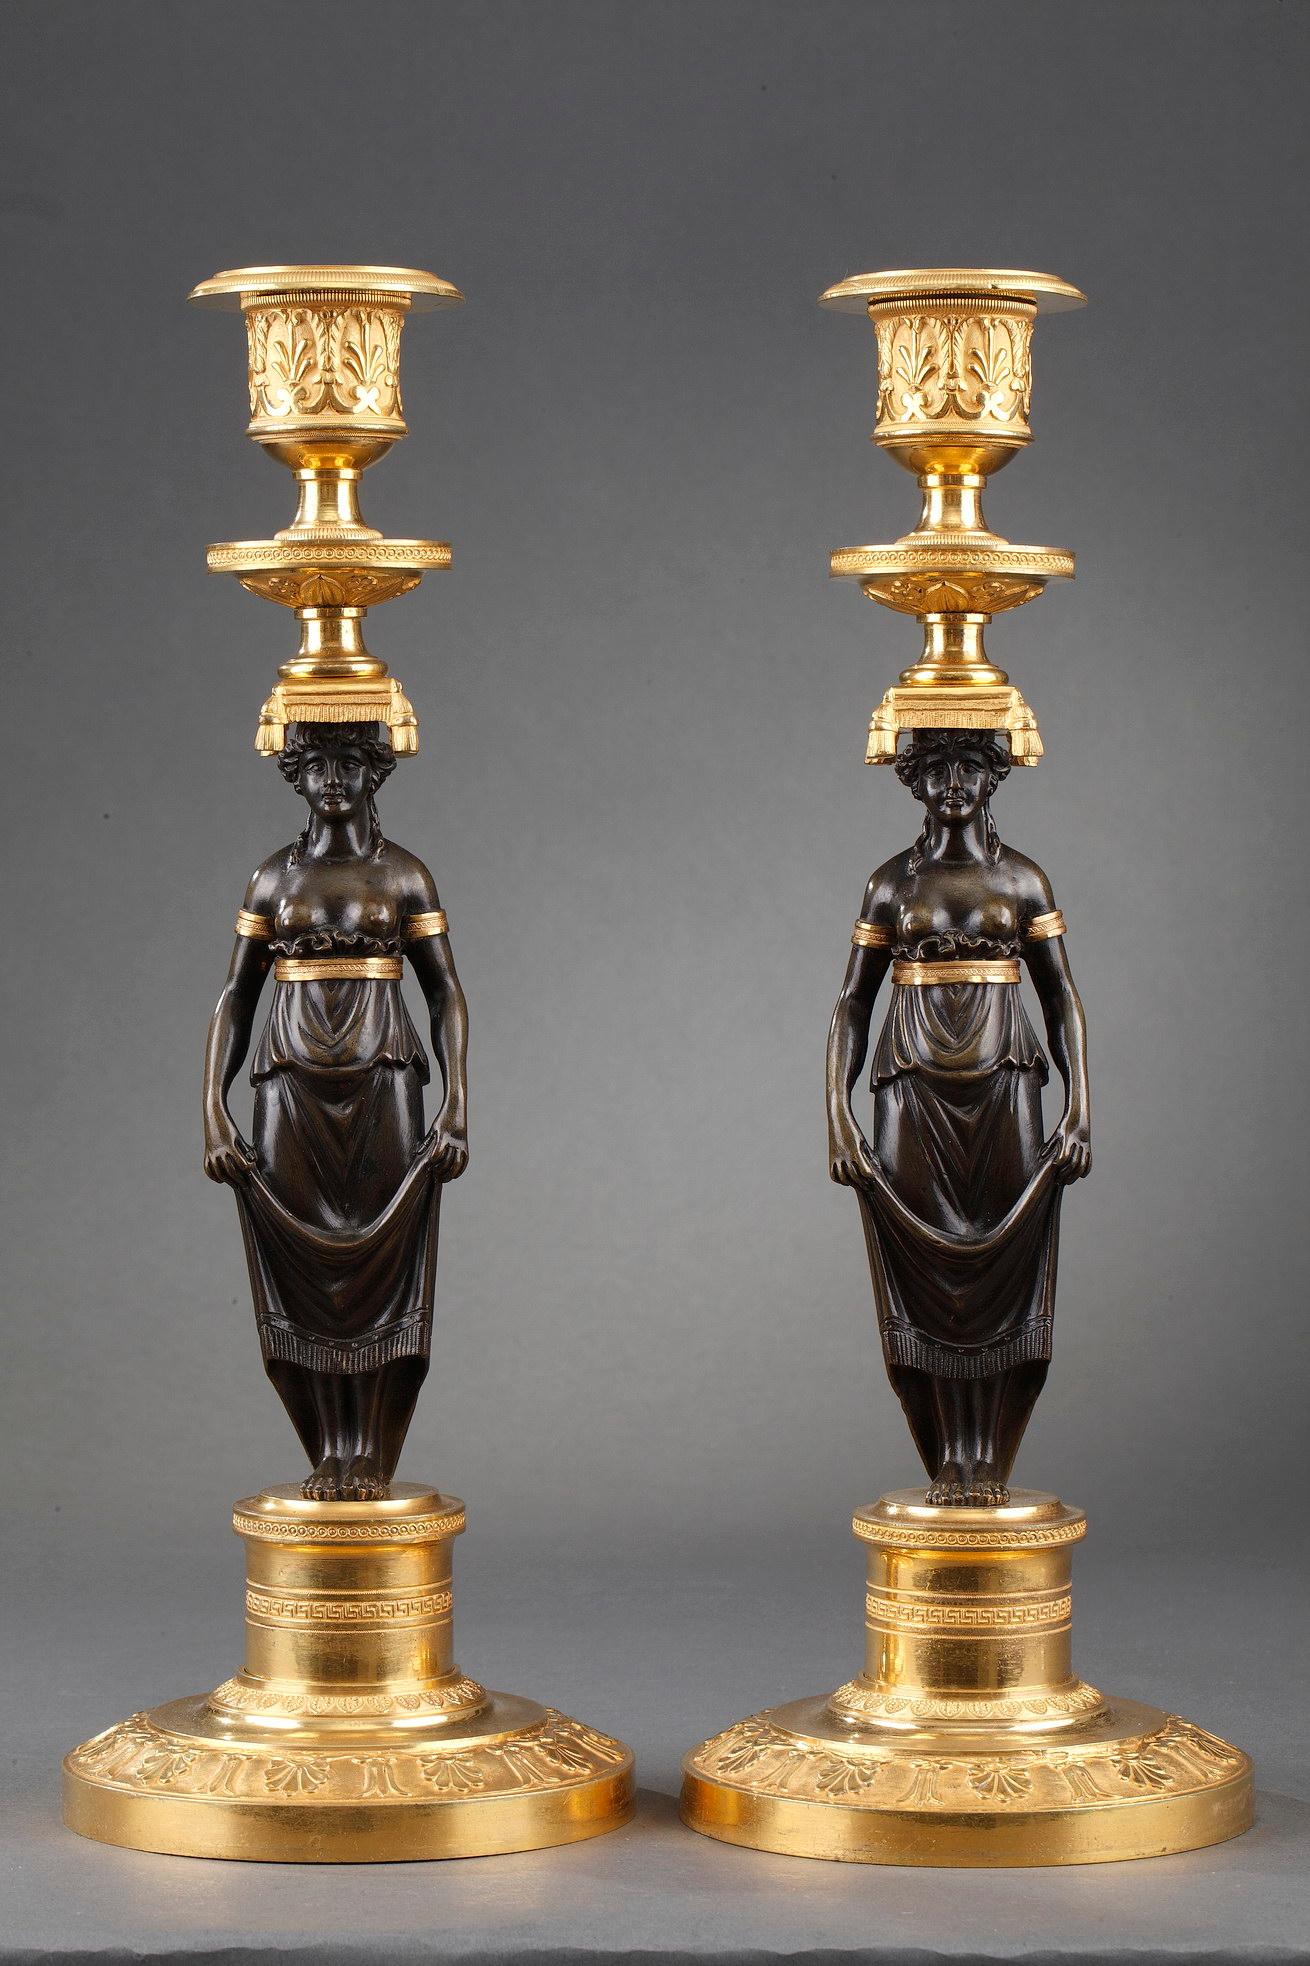 Beautiful Charles X pair of candlesticks in patinated and gilded bronze. The shafts present caryatids with bare chests whose drapery is retained at the waist by a gilded belt. They hold back their skirts to reveal their feet. They wear golden